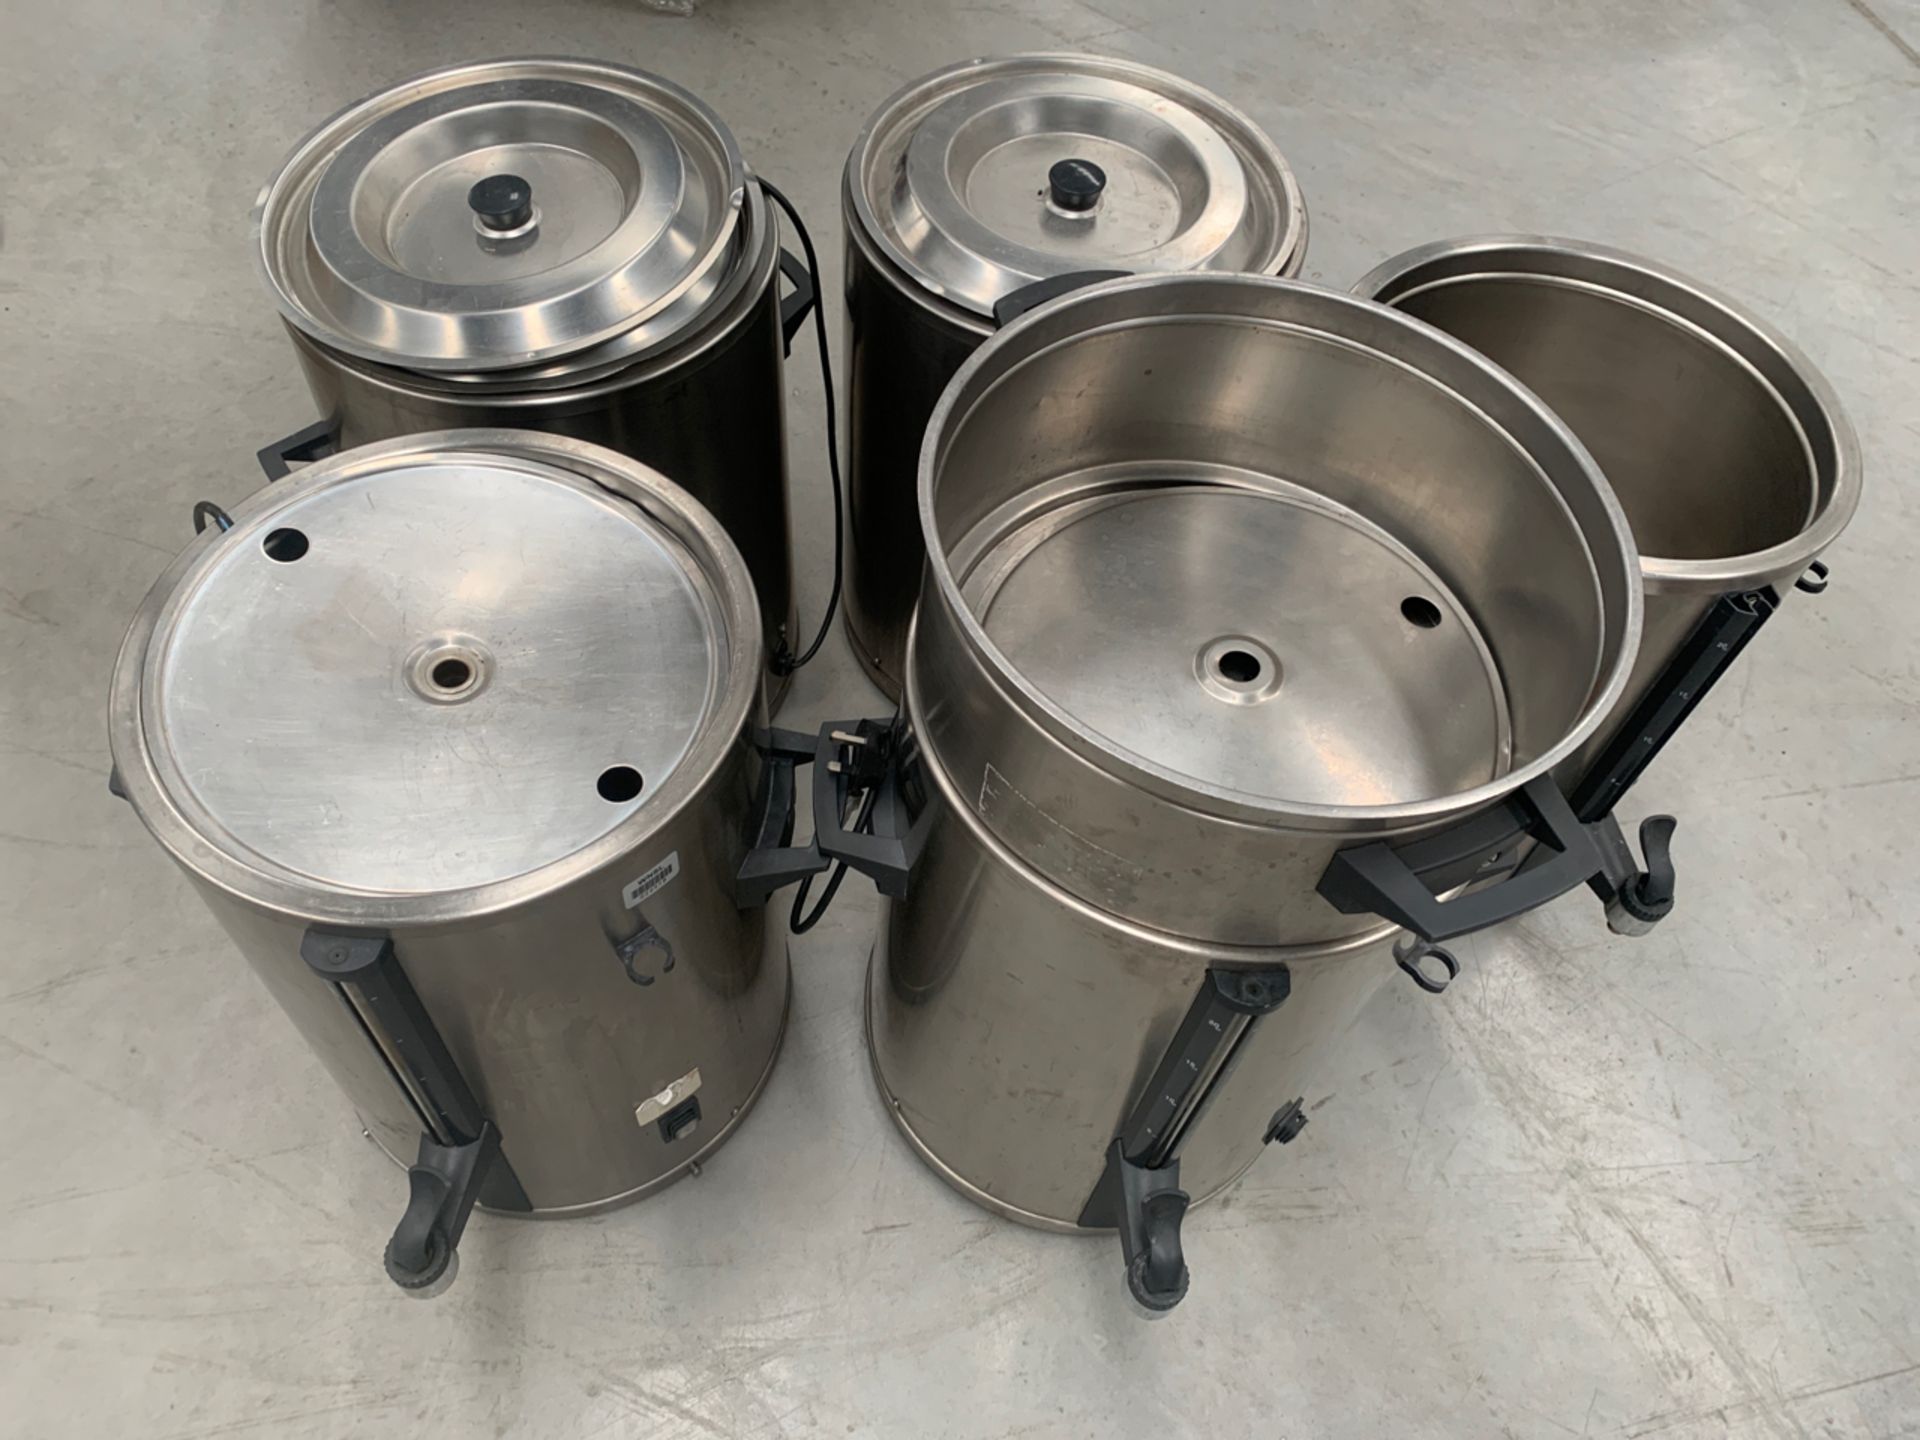 Set of 5 Stainless Steel Thermostatically Controlled 20L Coffee Containers - Image 2 of 5